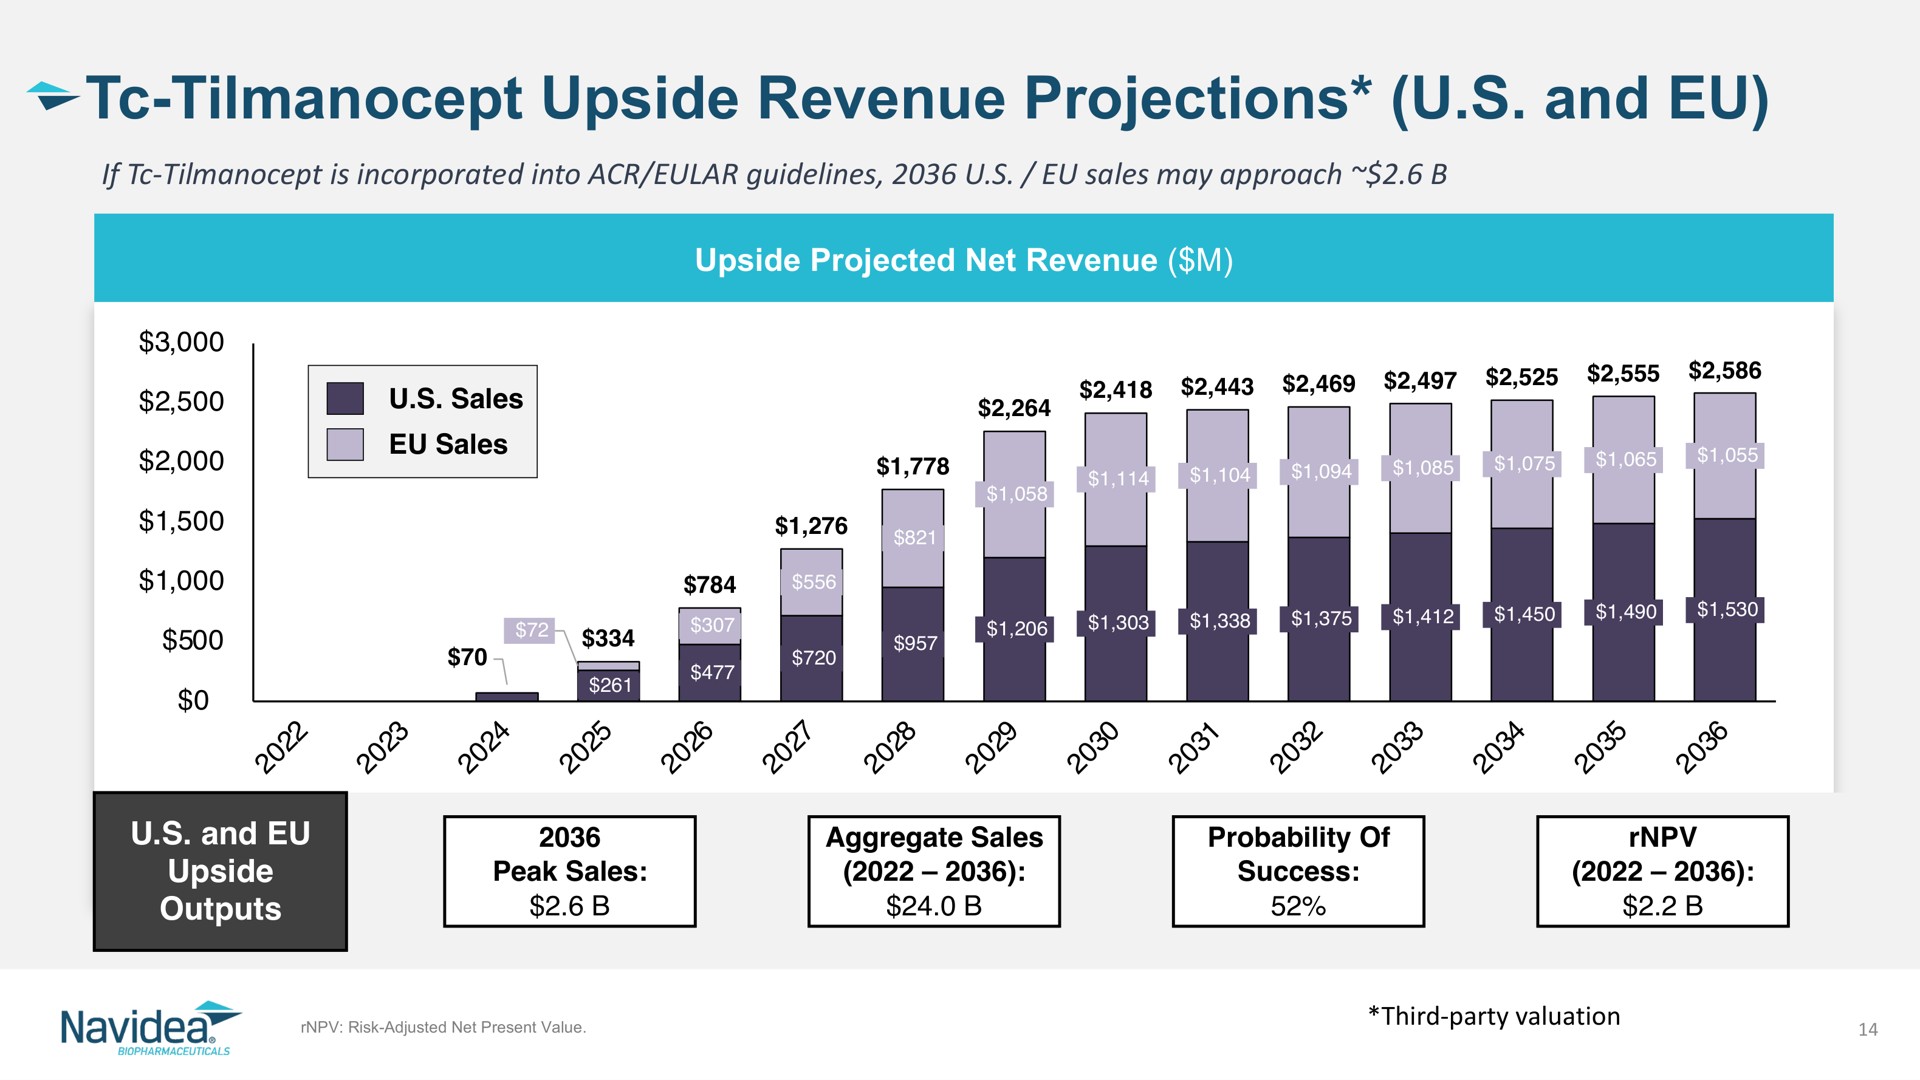 upside revenue projections and | Navidea Biopharmaceuticals